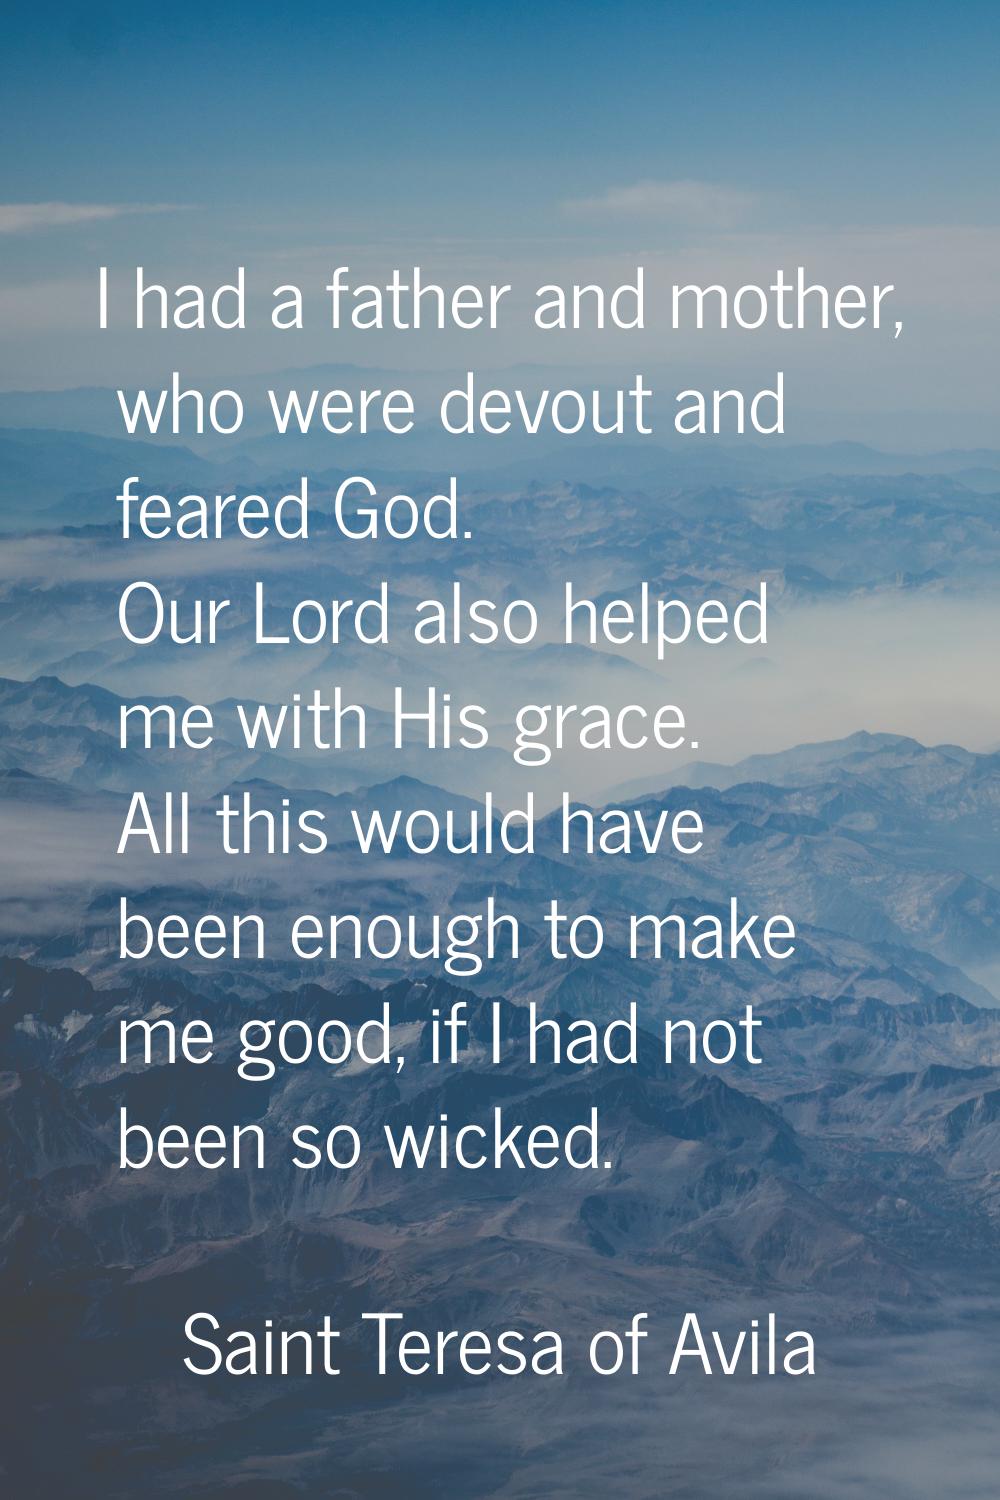 I had a father and mother, who were devout and feared God. Our Lord also helped me with His grace. 